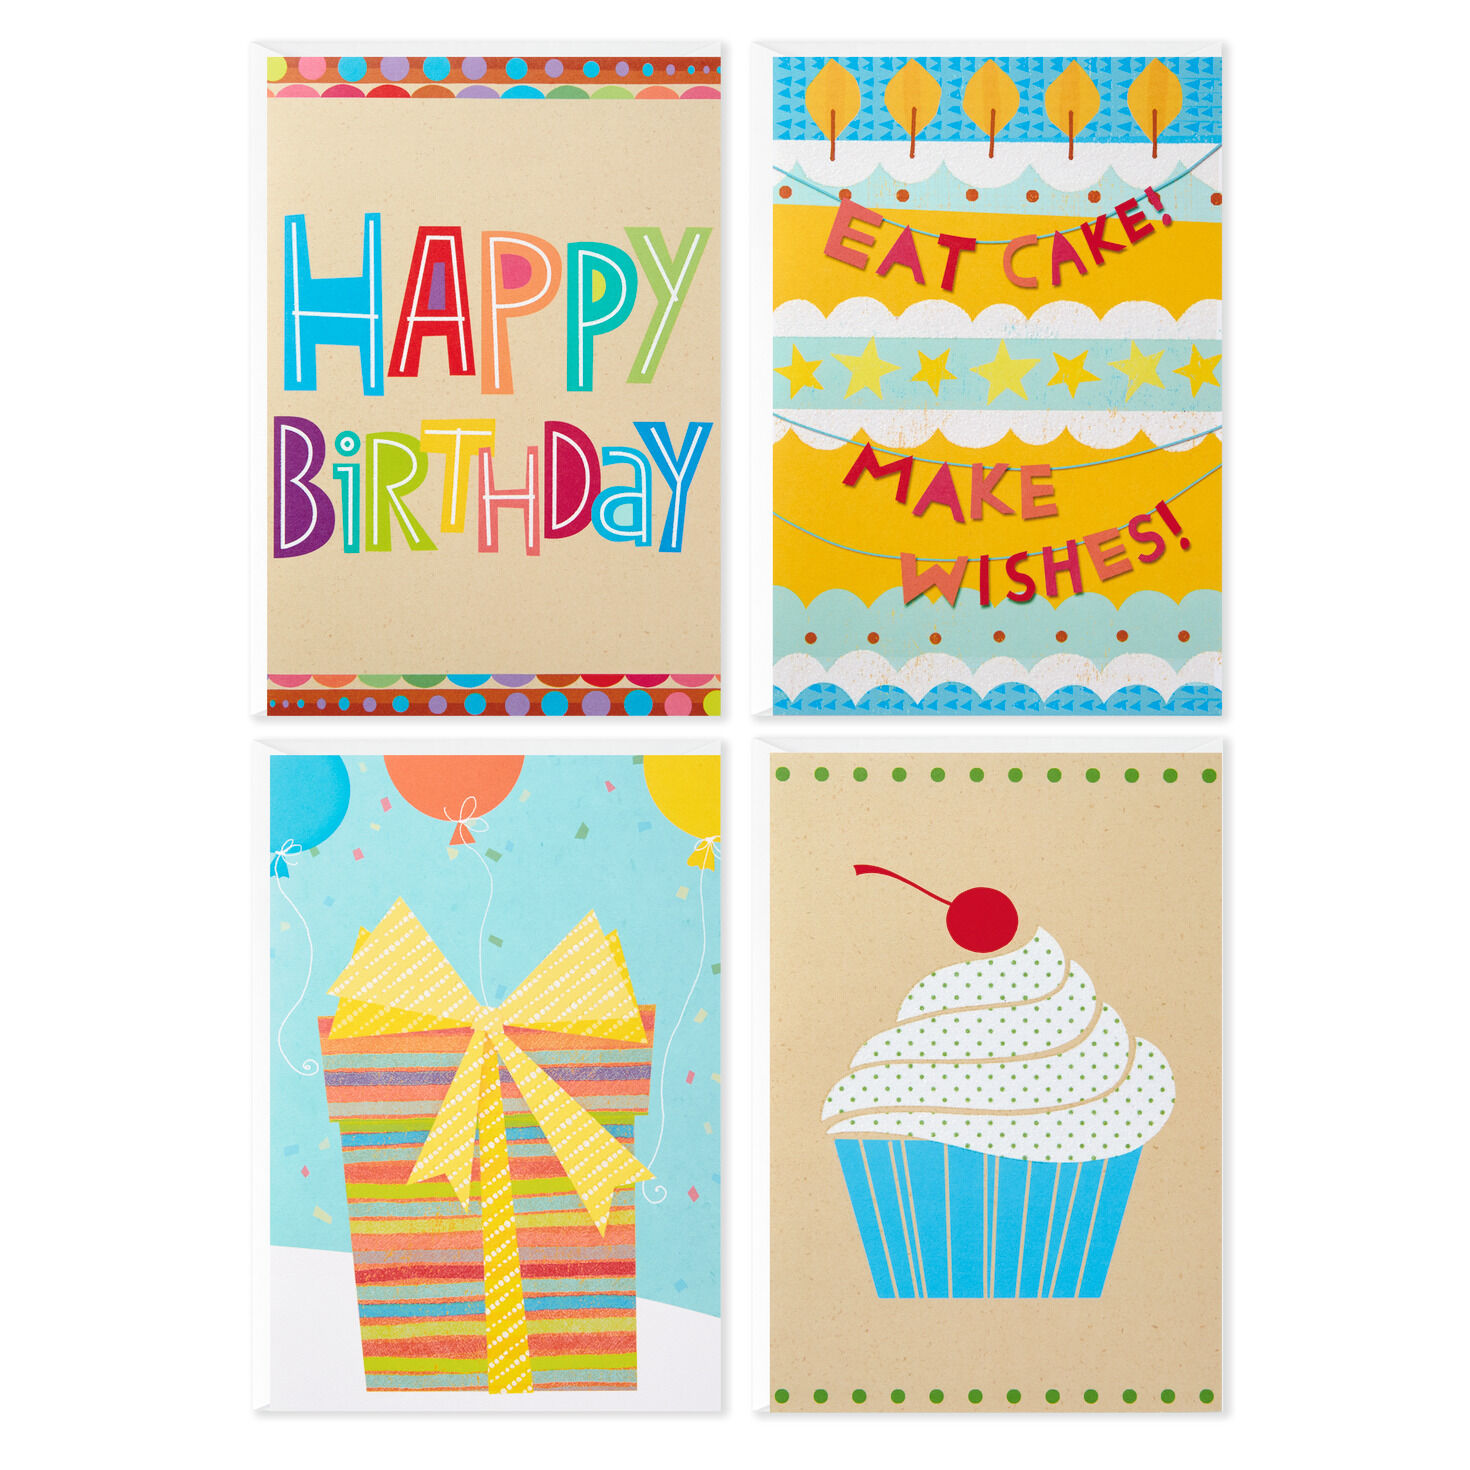 Send one a day or all at once. Set of twelve unique birthday cards that count-up to a boys or girls 12th birthday